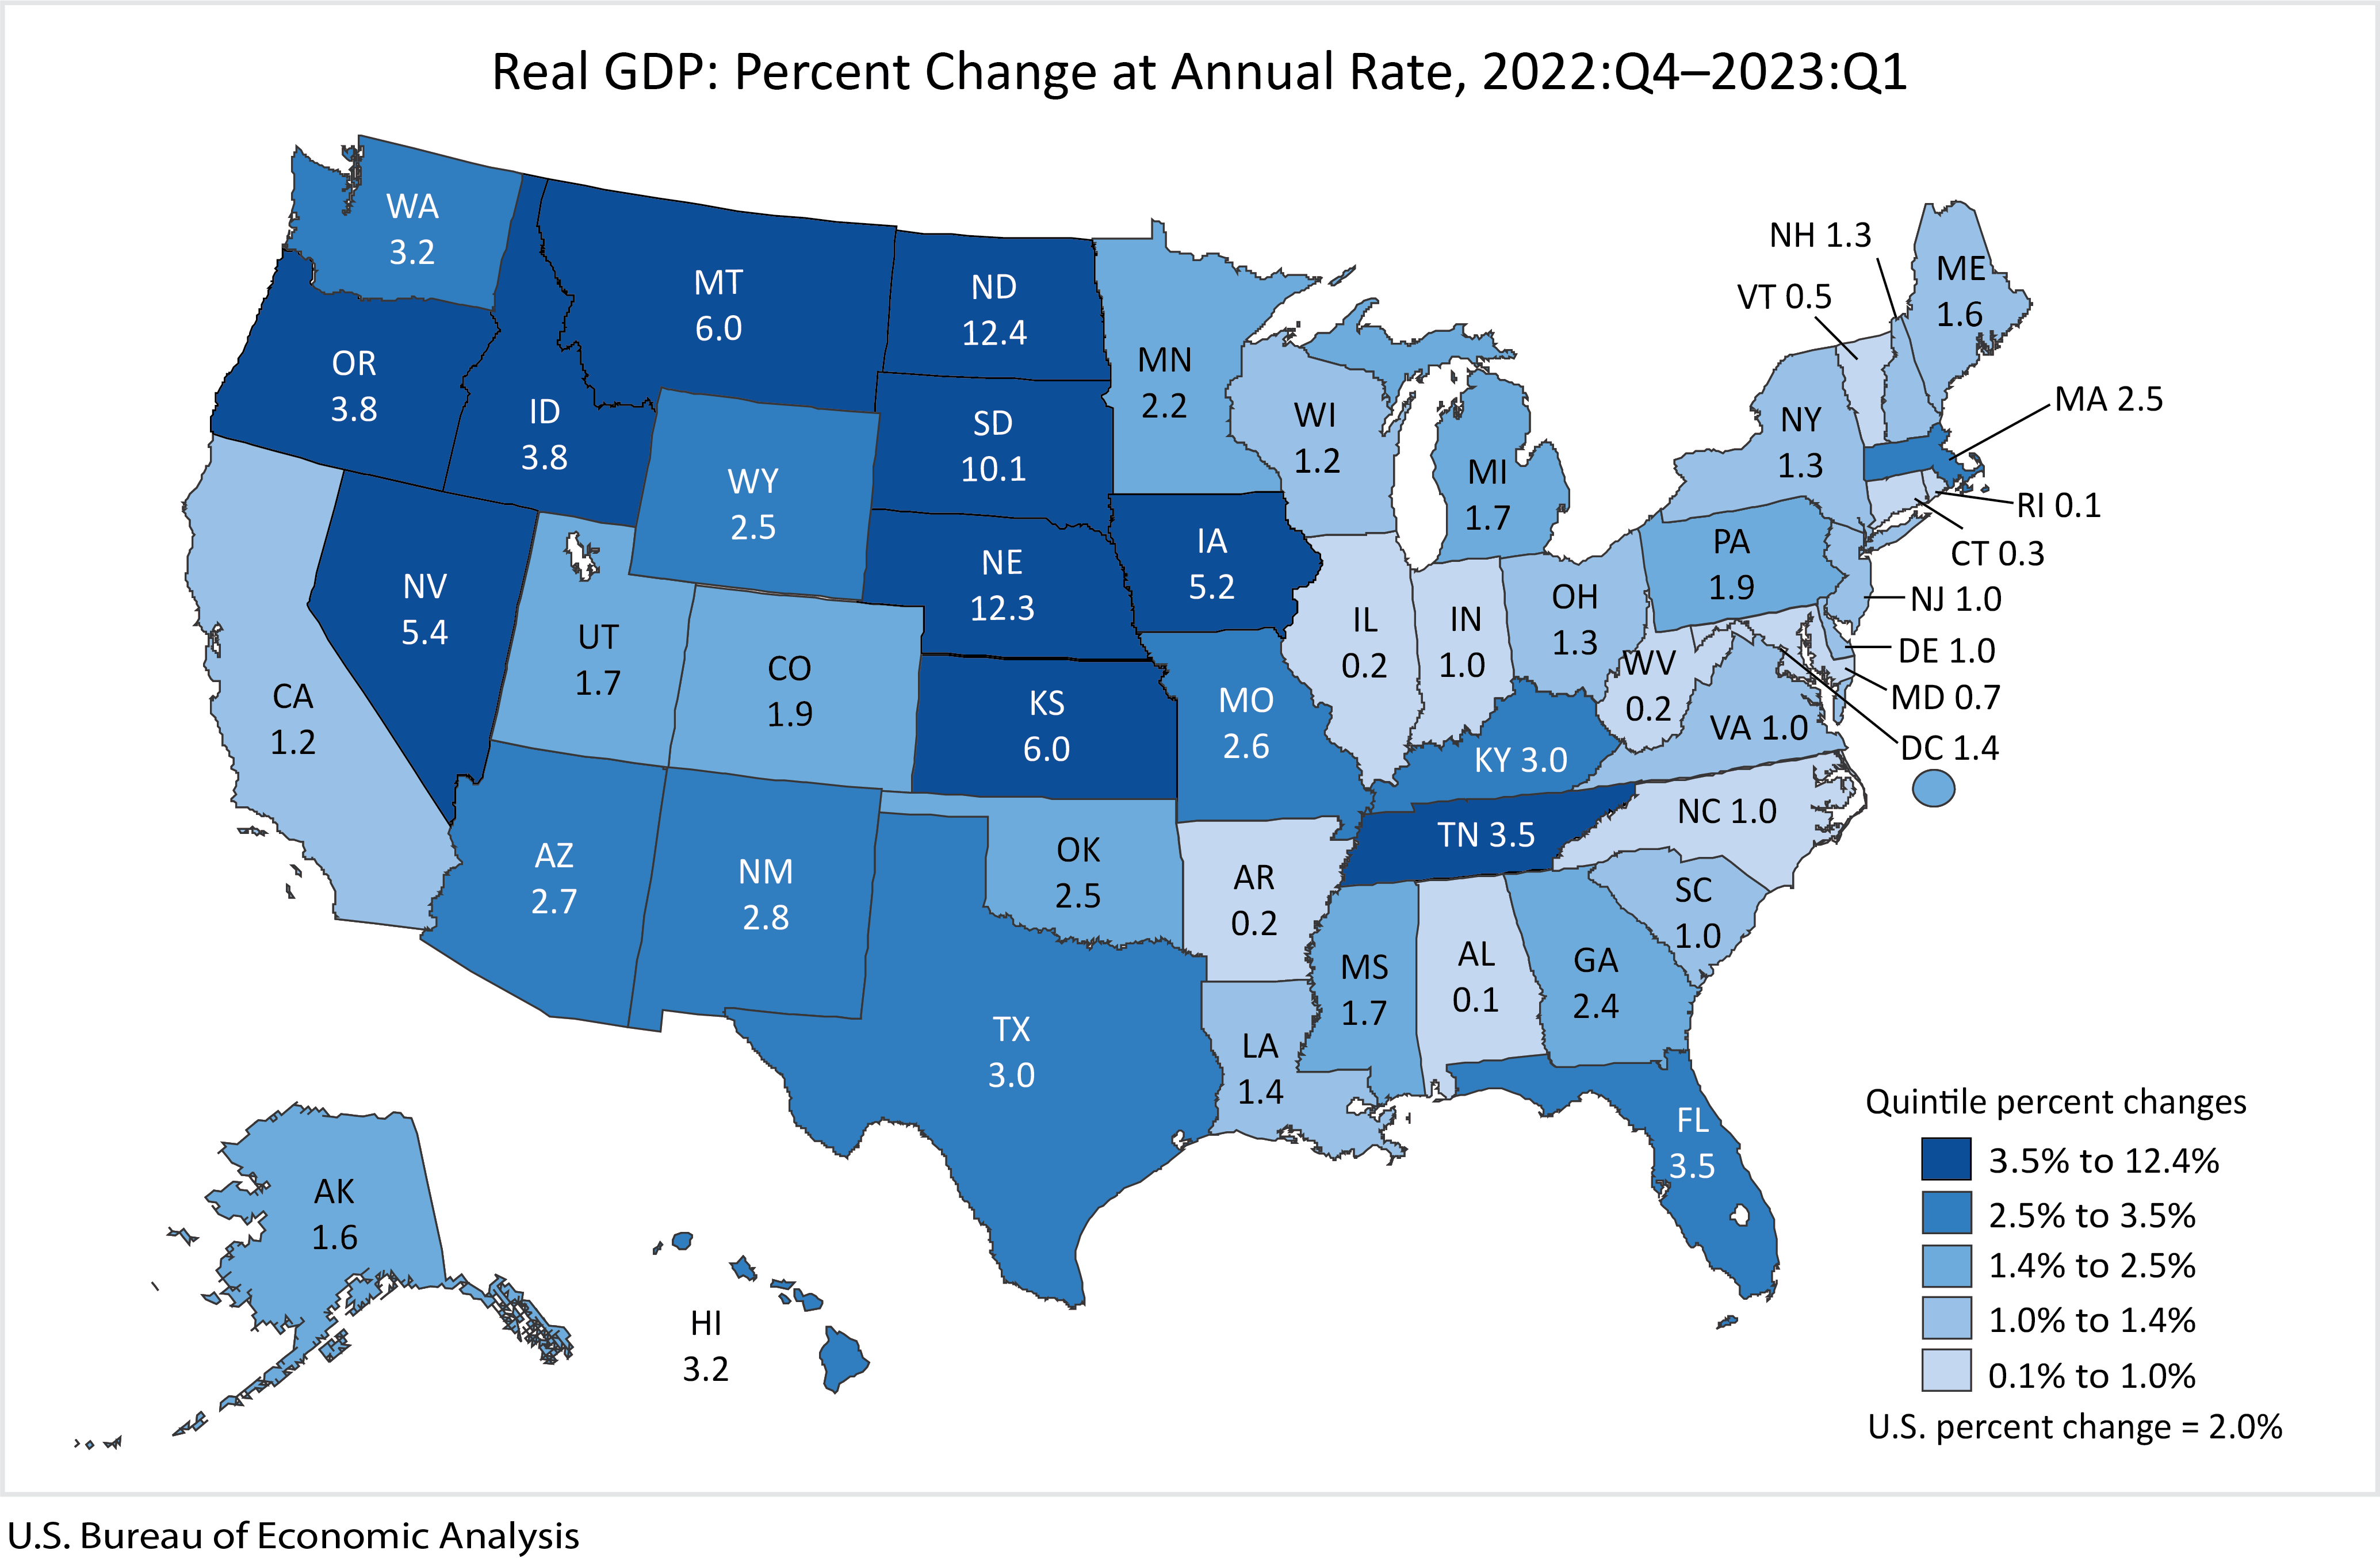 Map of USA showing GDP percent change at annual rate 2022 4th Quarter to 2023 1st Quarter.